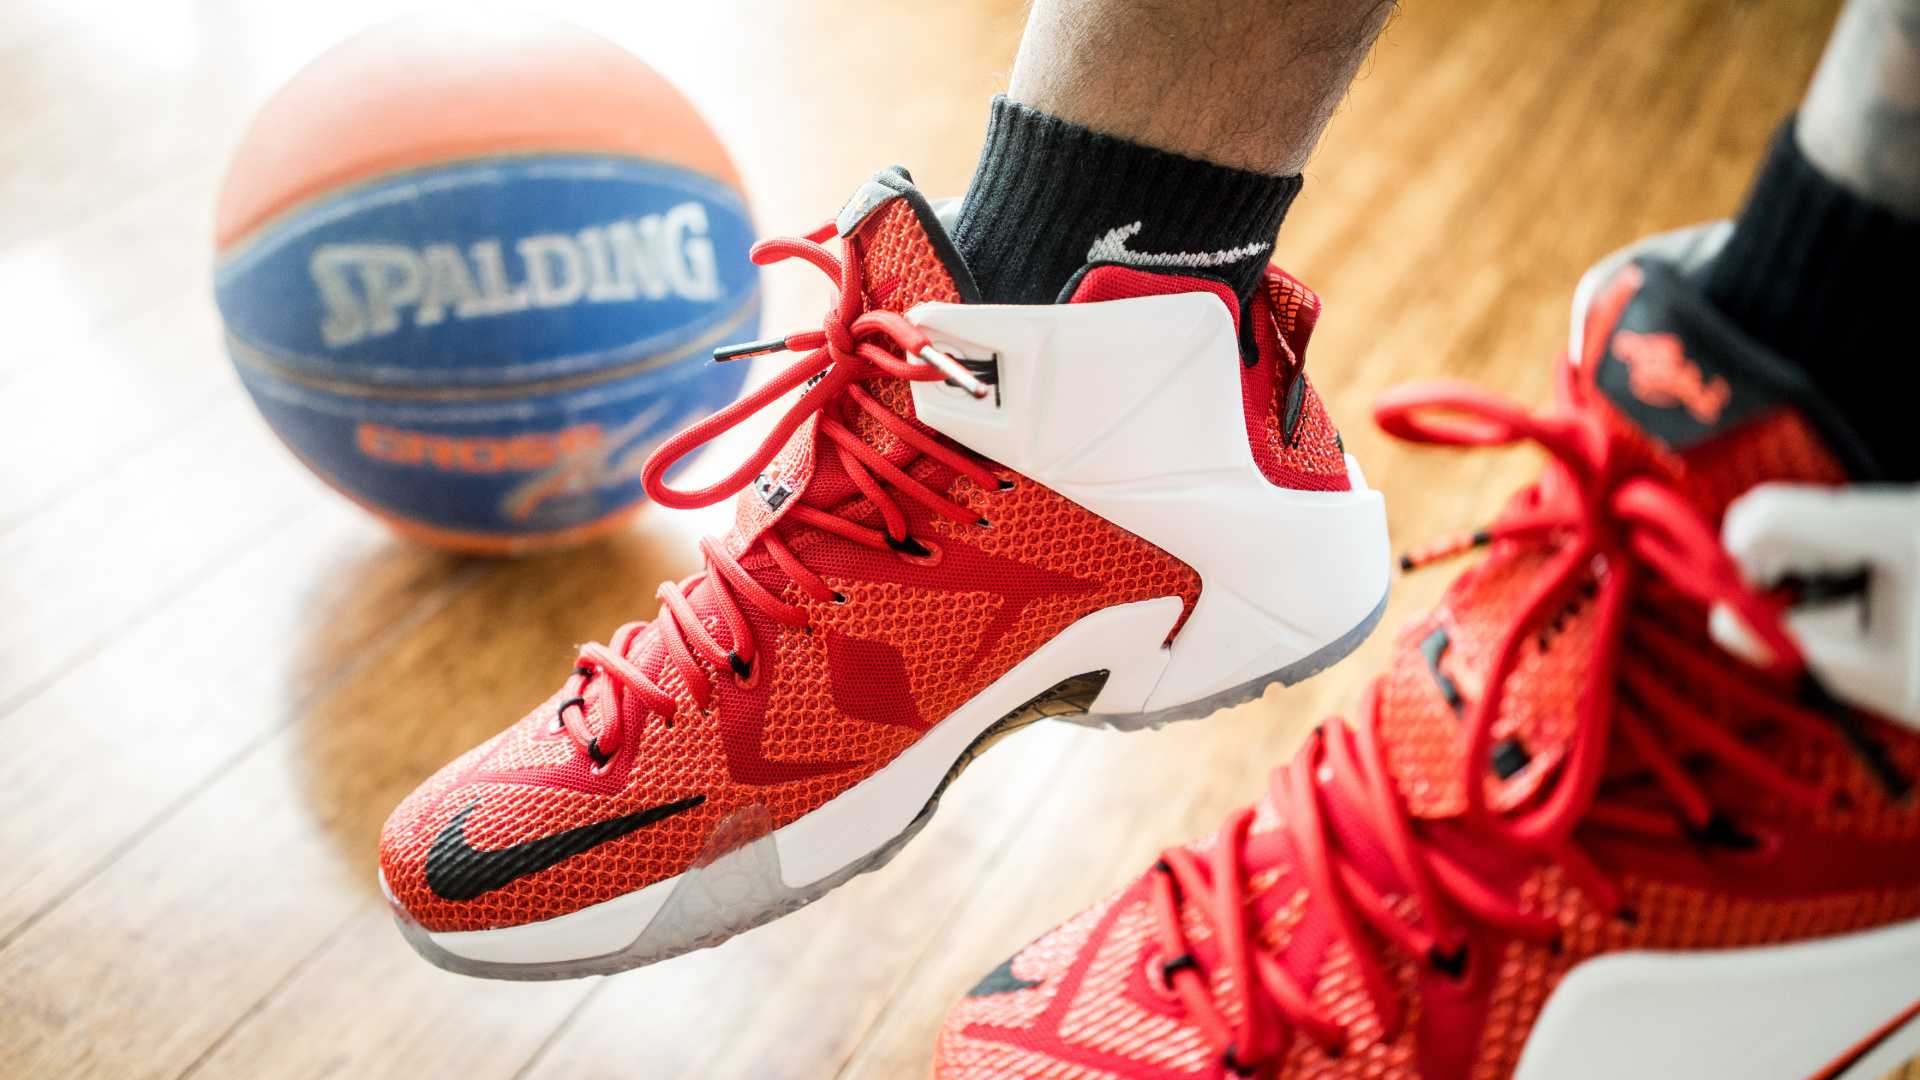 Person Wearing Red Nike Basketball Shoes. Wallpaper in 1920x1080 Resolution